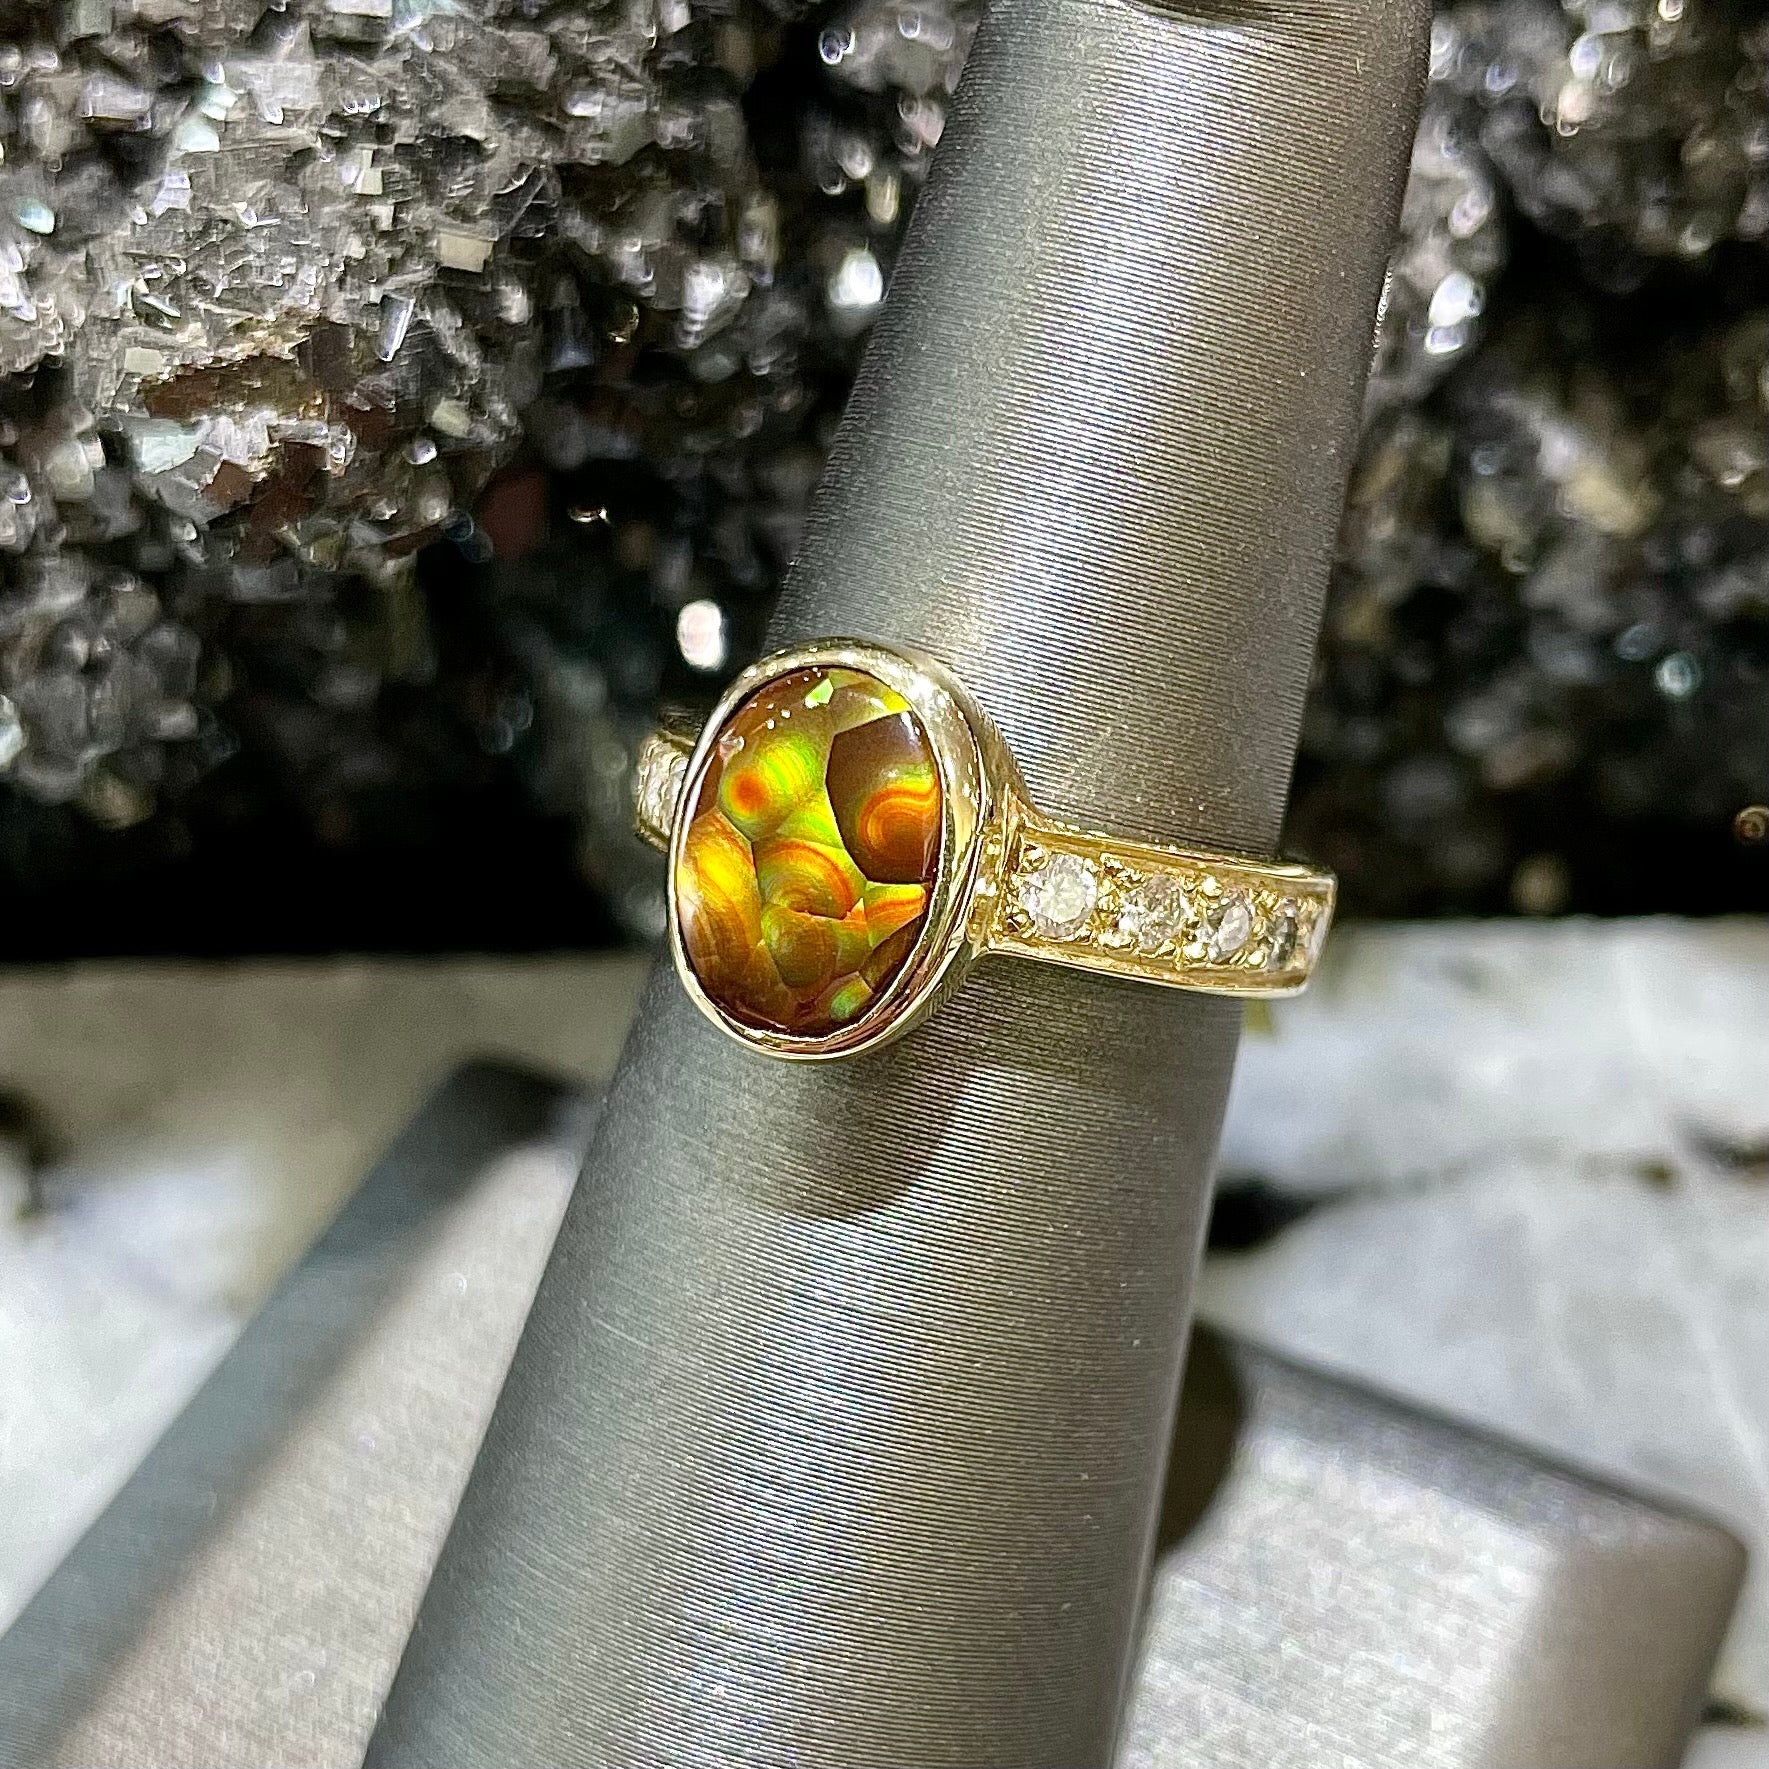 A ladies' oval cabochon cut fire agate and diamond engagement ring cast in yellow gold.